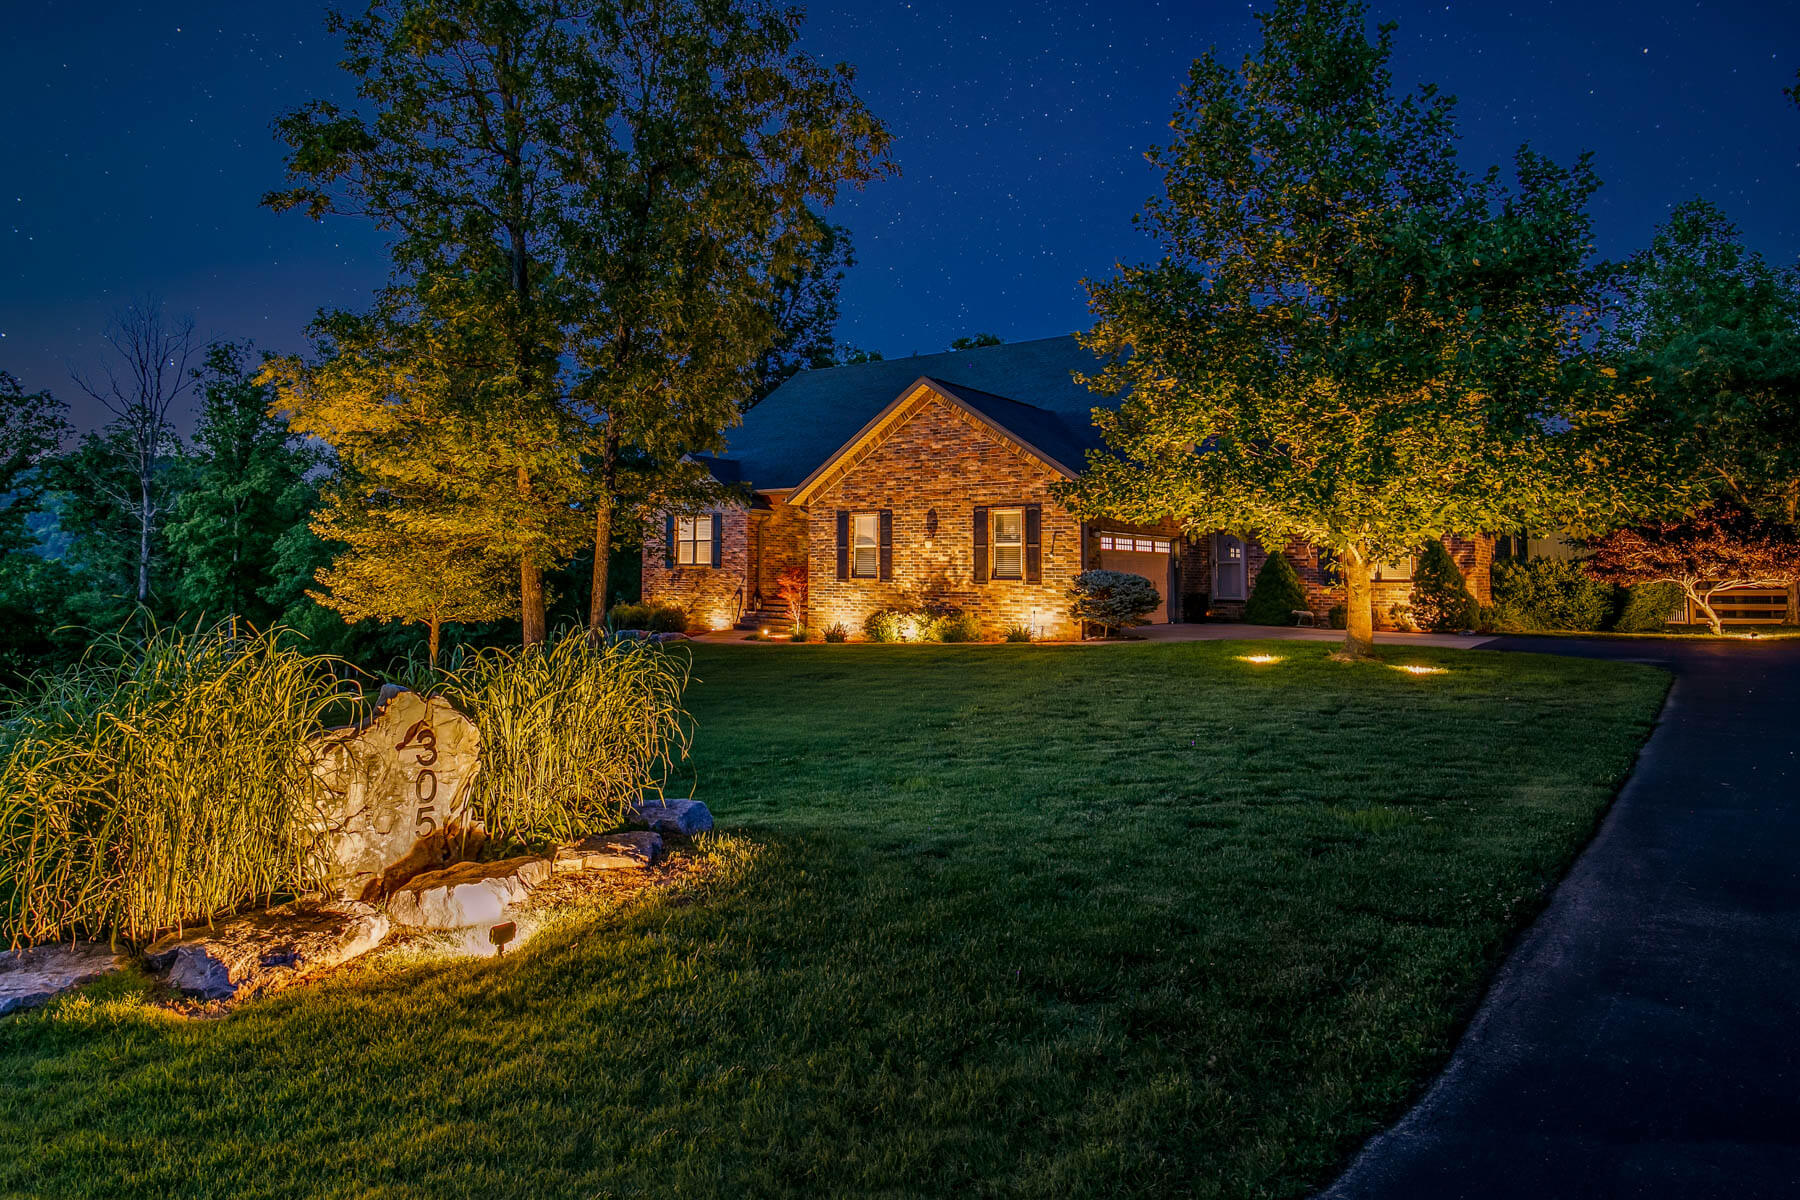 dimly lit outdoor lighting for a large-scale residential home